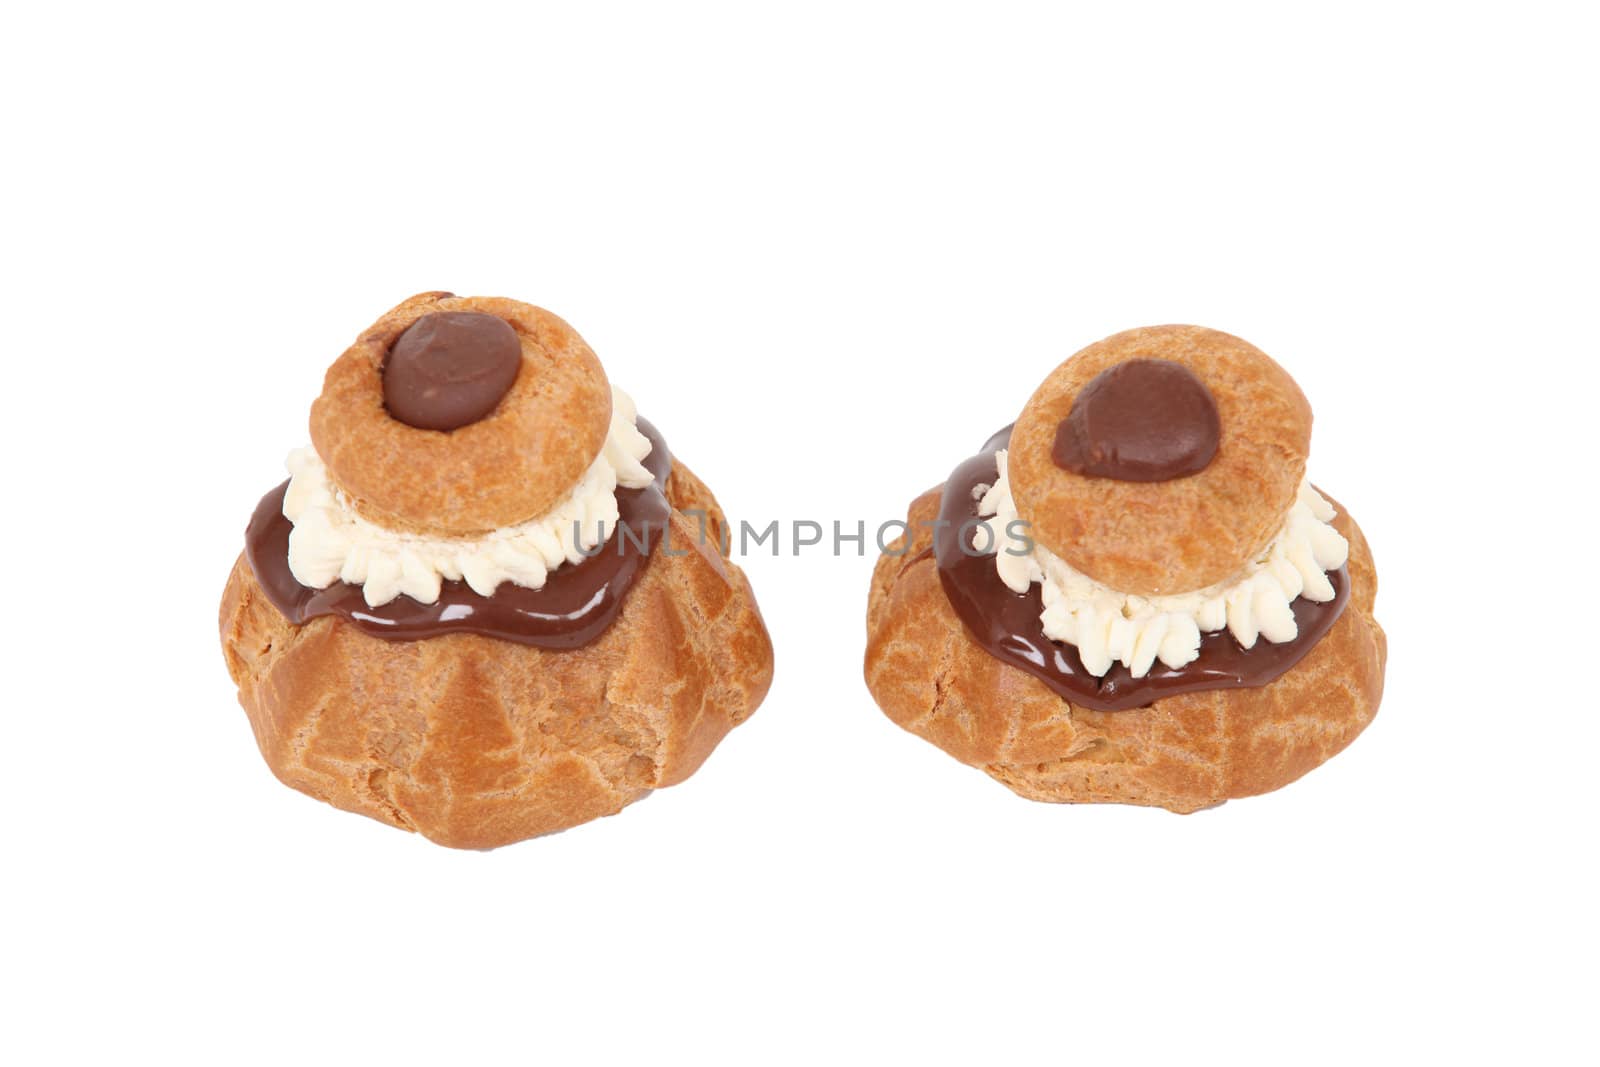 Two cream filled dessert by phovoir